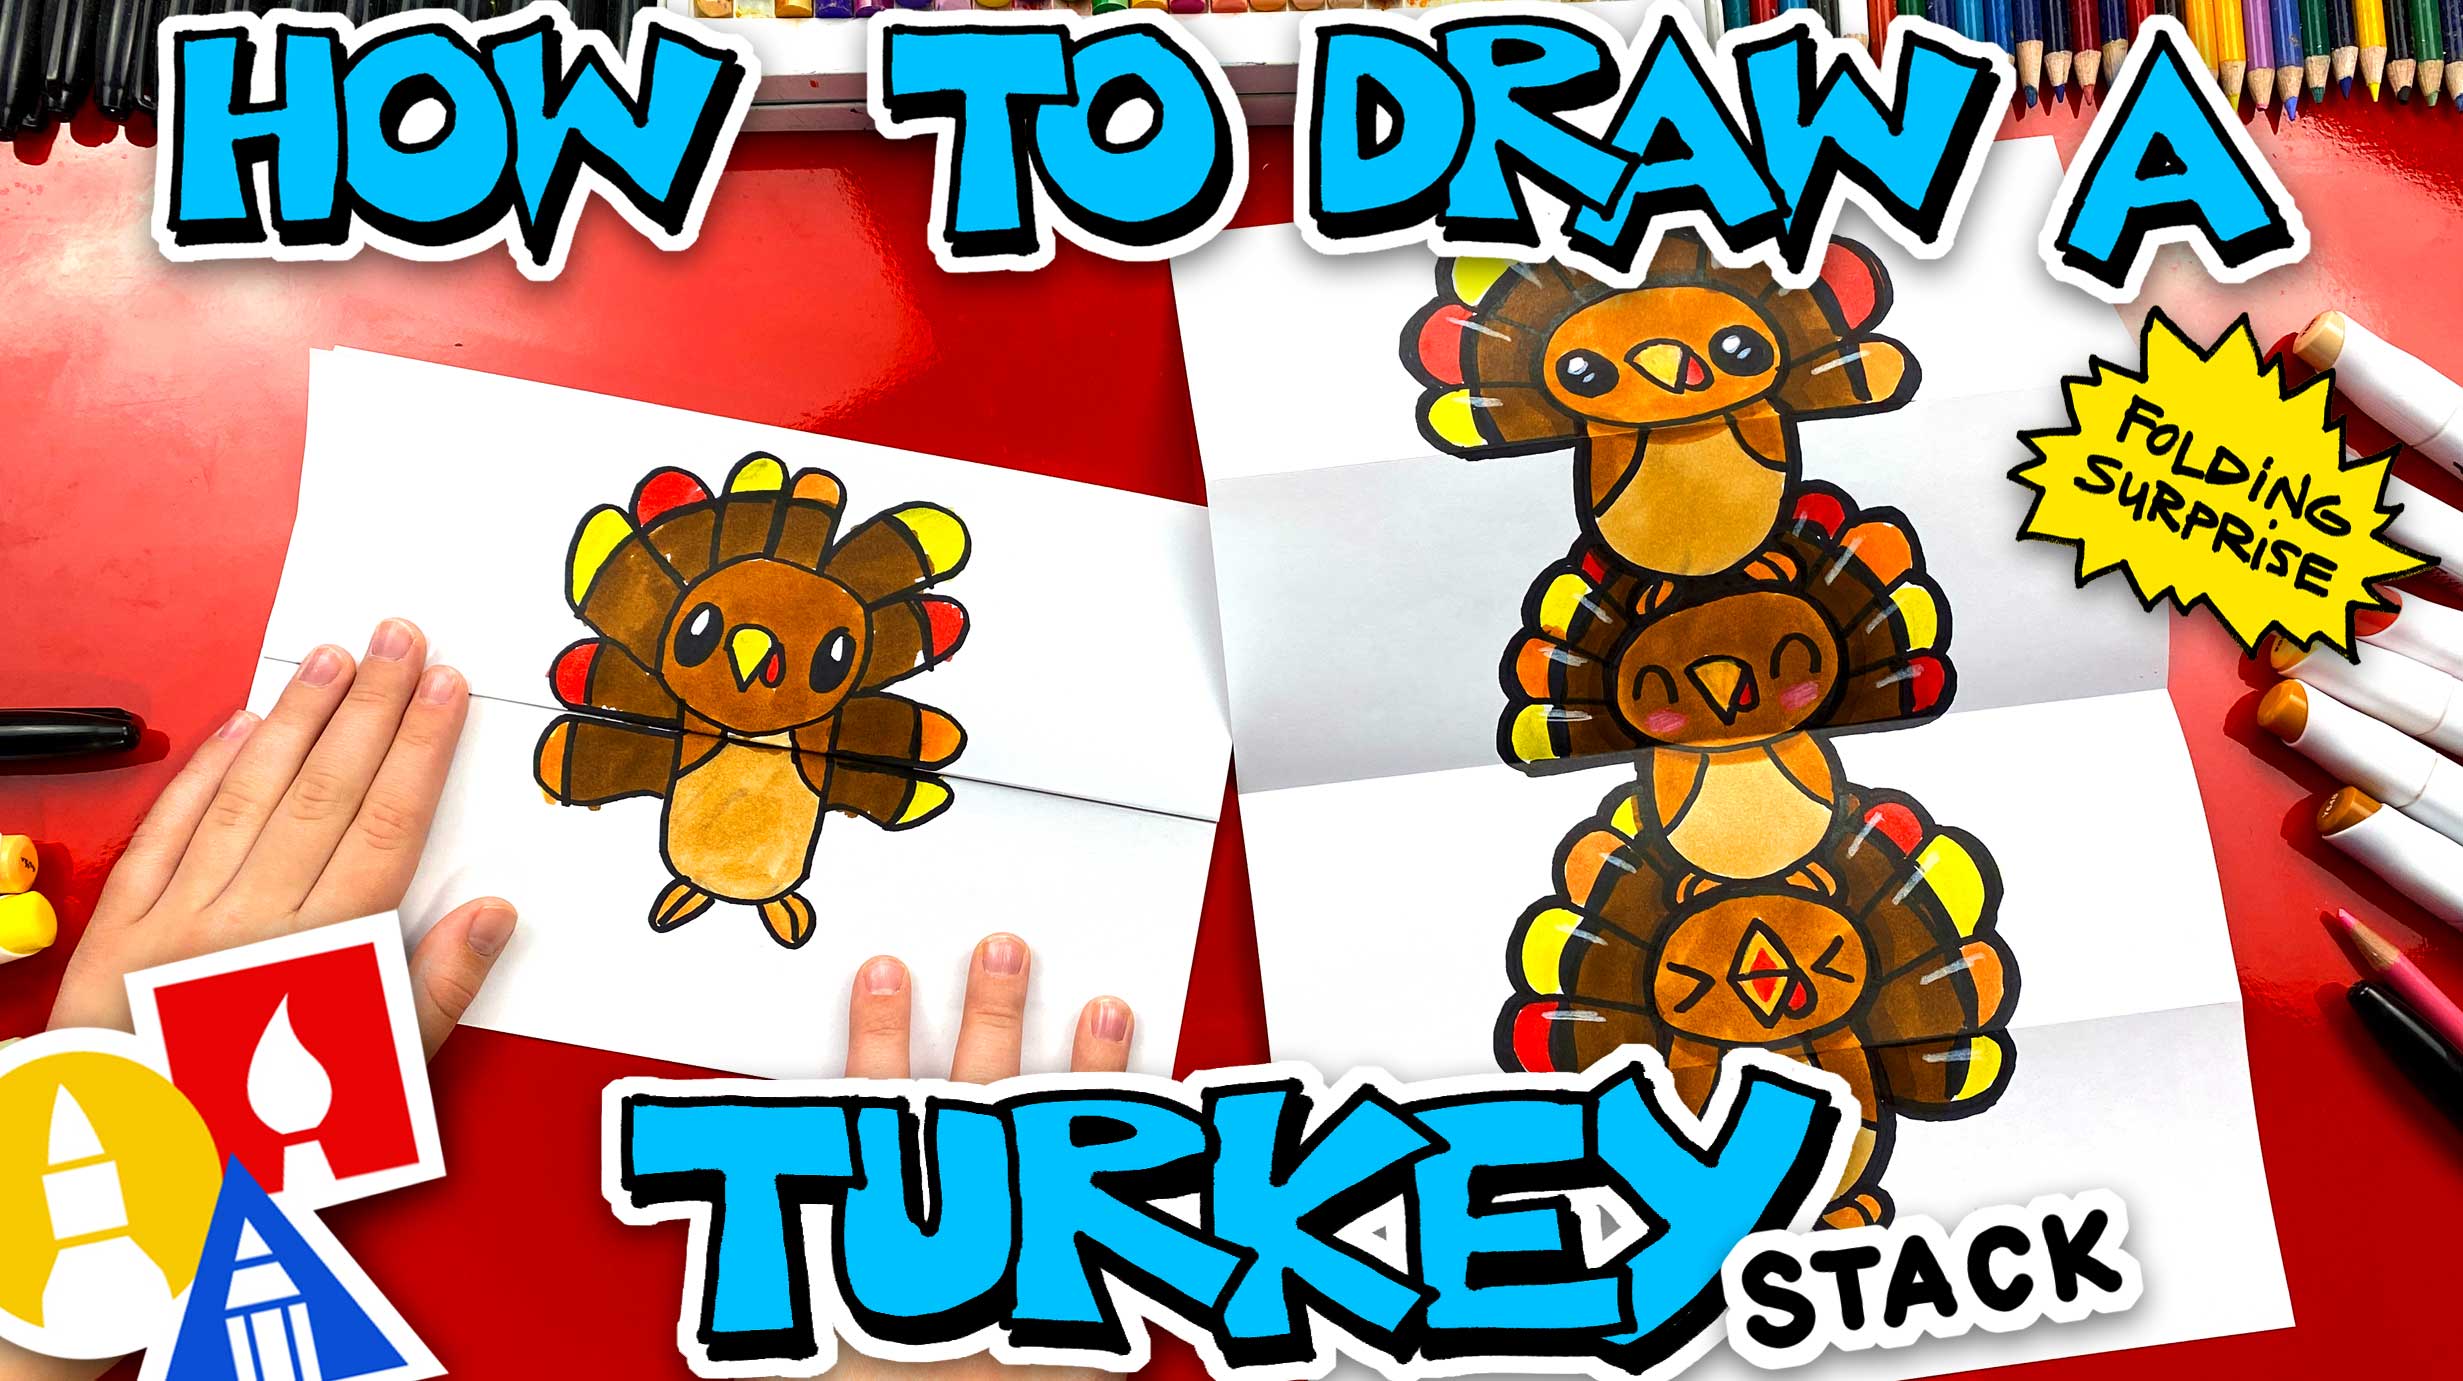 How To Draw A Turkey Stack For Thanksgiving